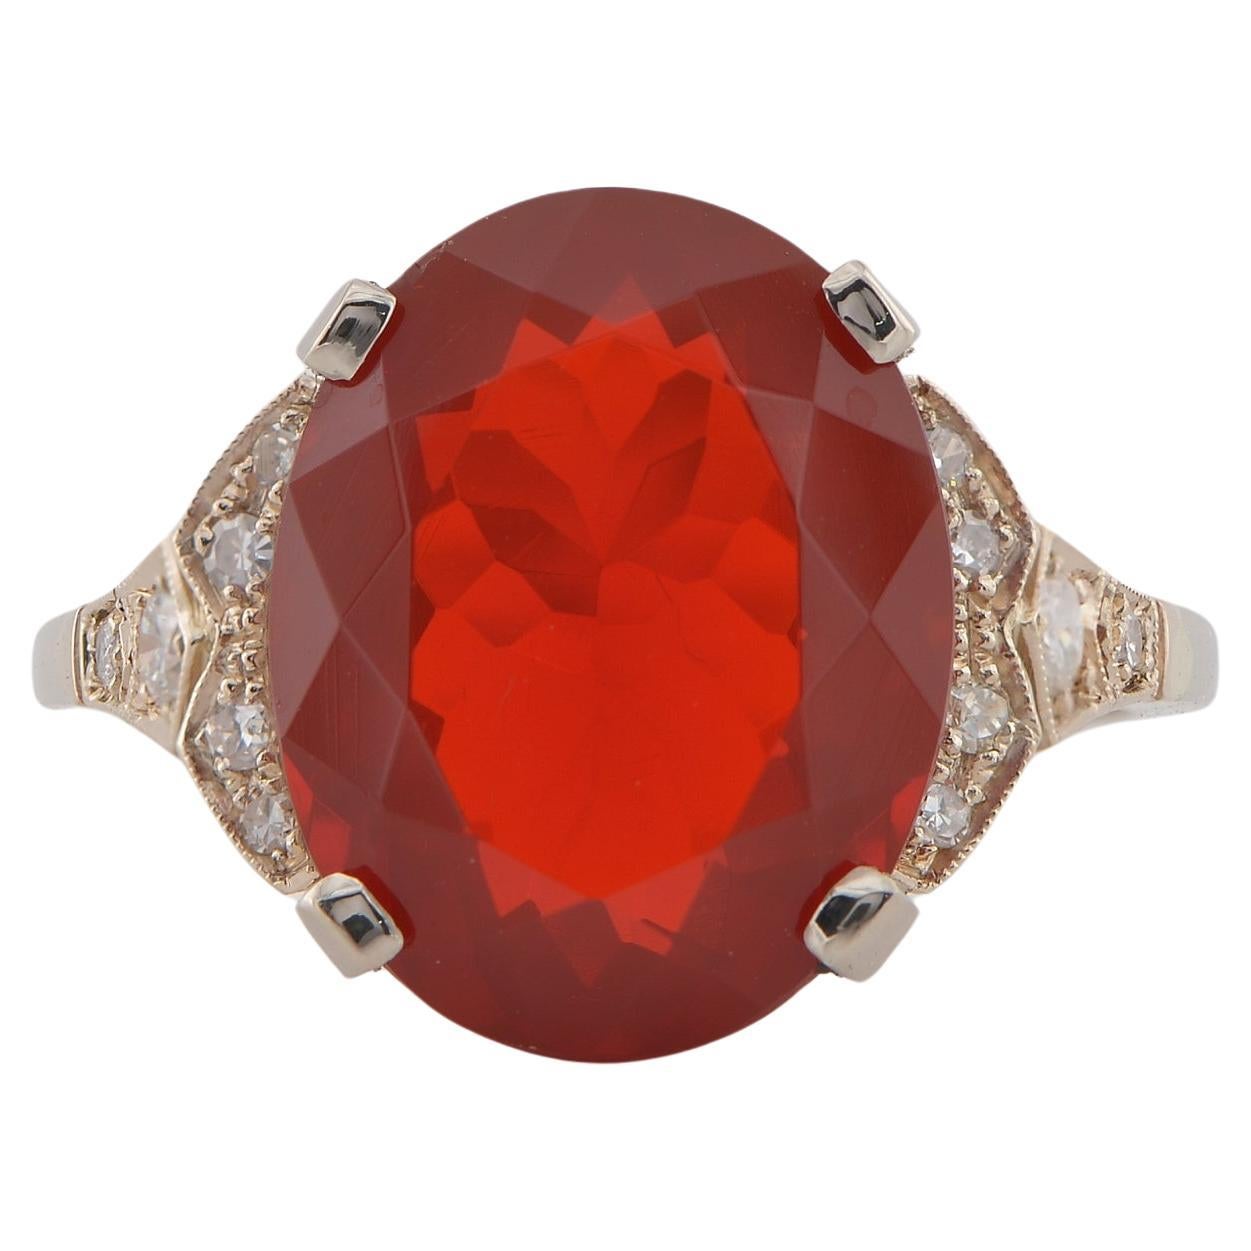 Vintage Style 6.0 Ct. Ruby Red Fire Opal Diamond Solitaire ring For Sale